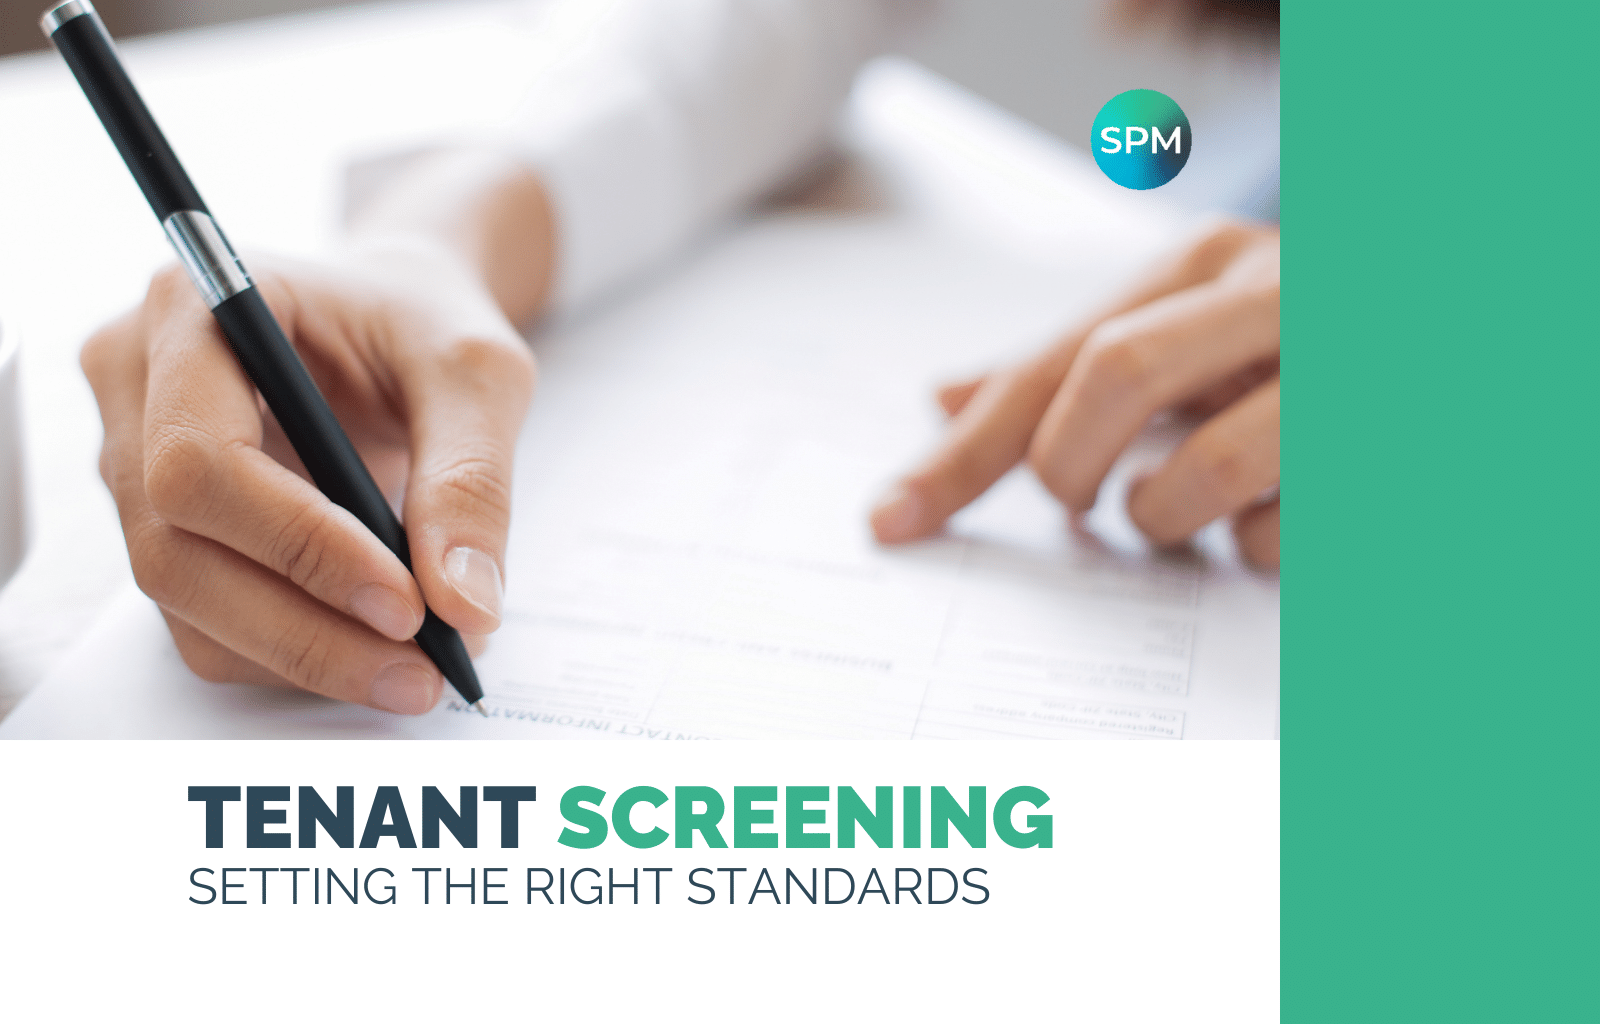 Tenant Screening - Setting the right standards